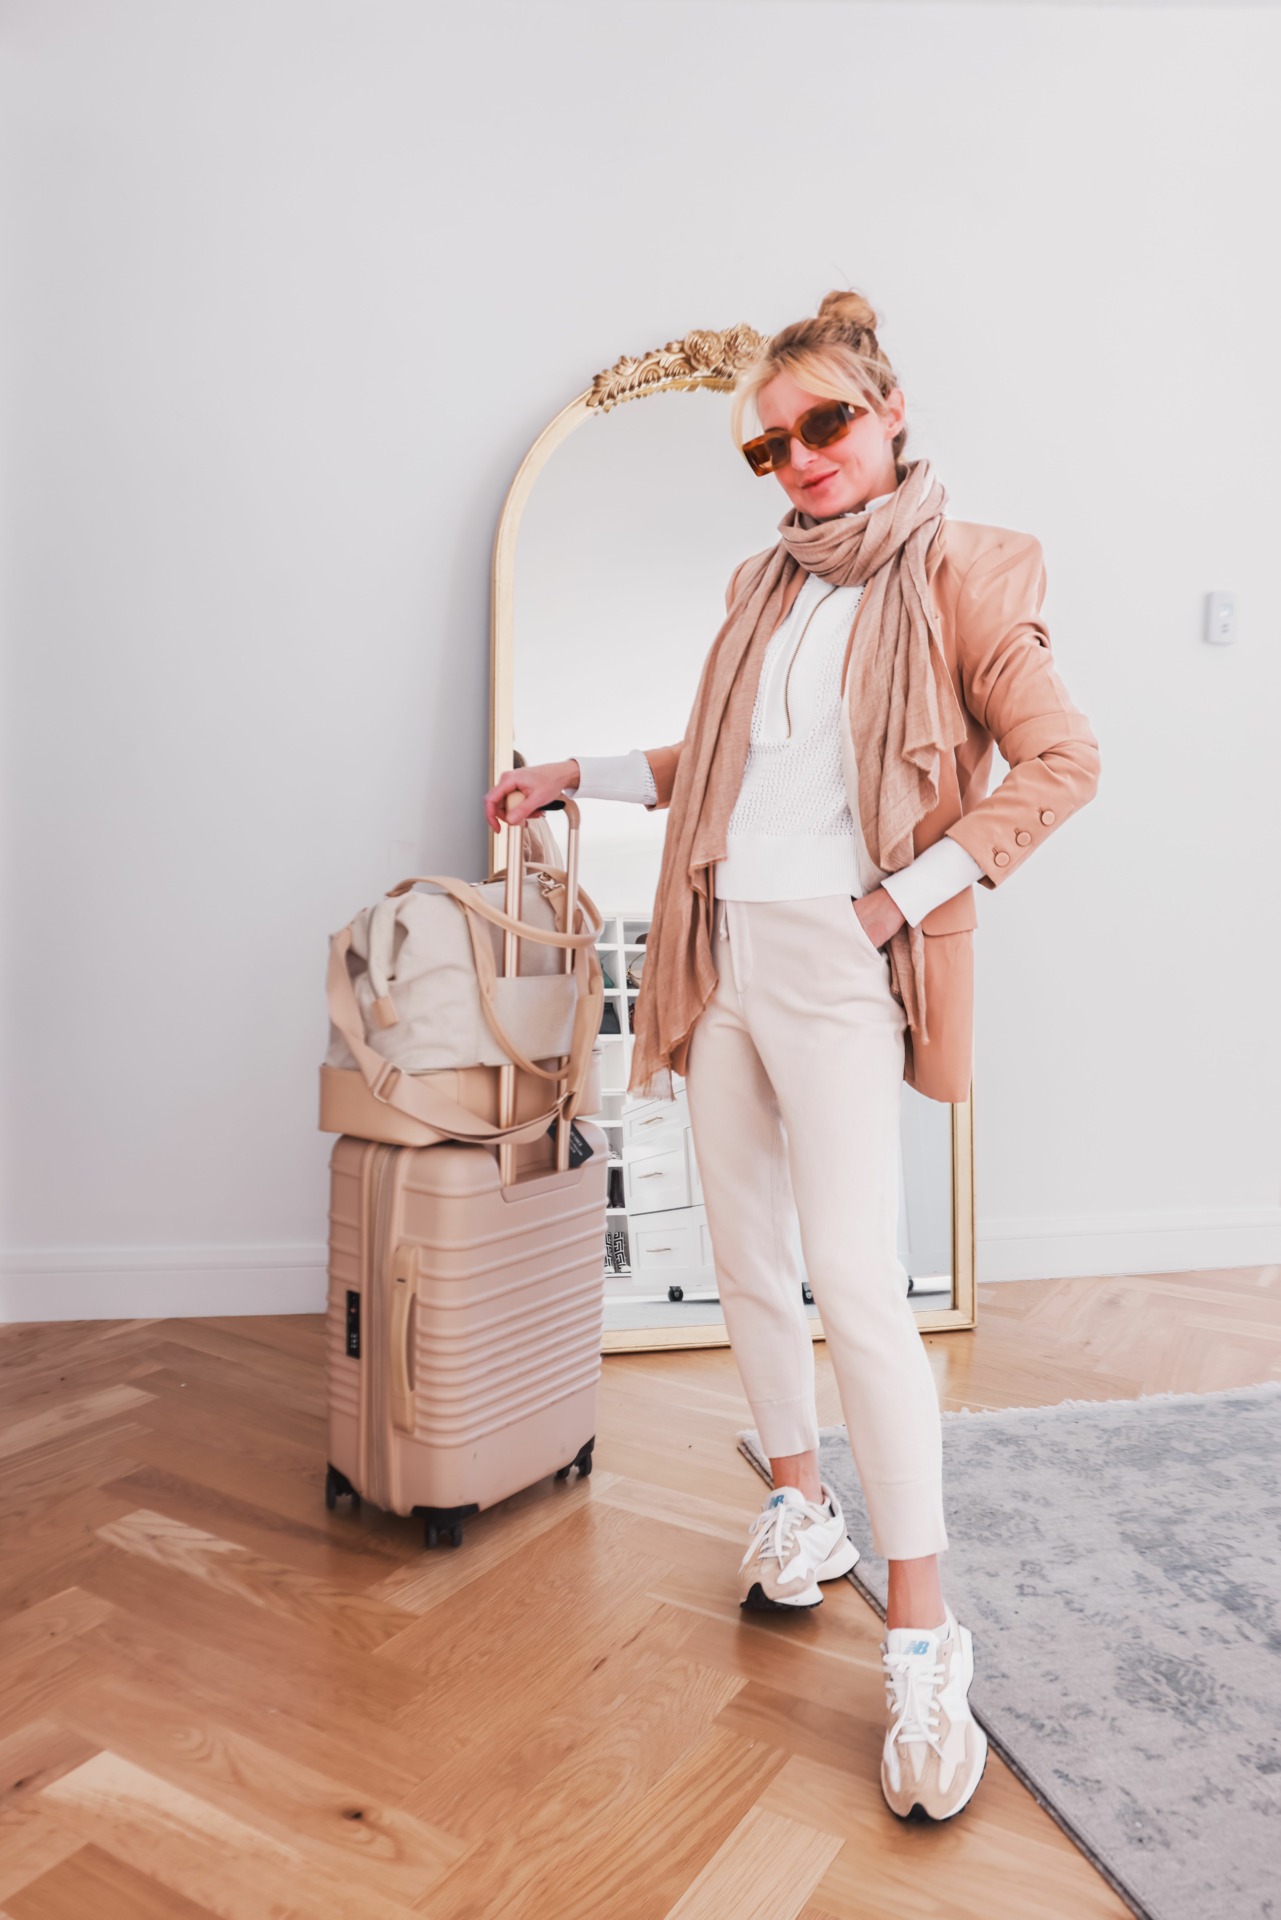 12 Best Packing Tips for an Action-Packed Trip In a Carry-On Suitcase